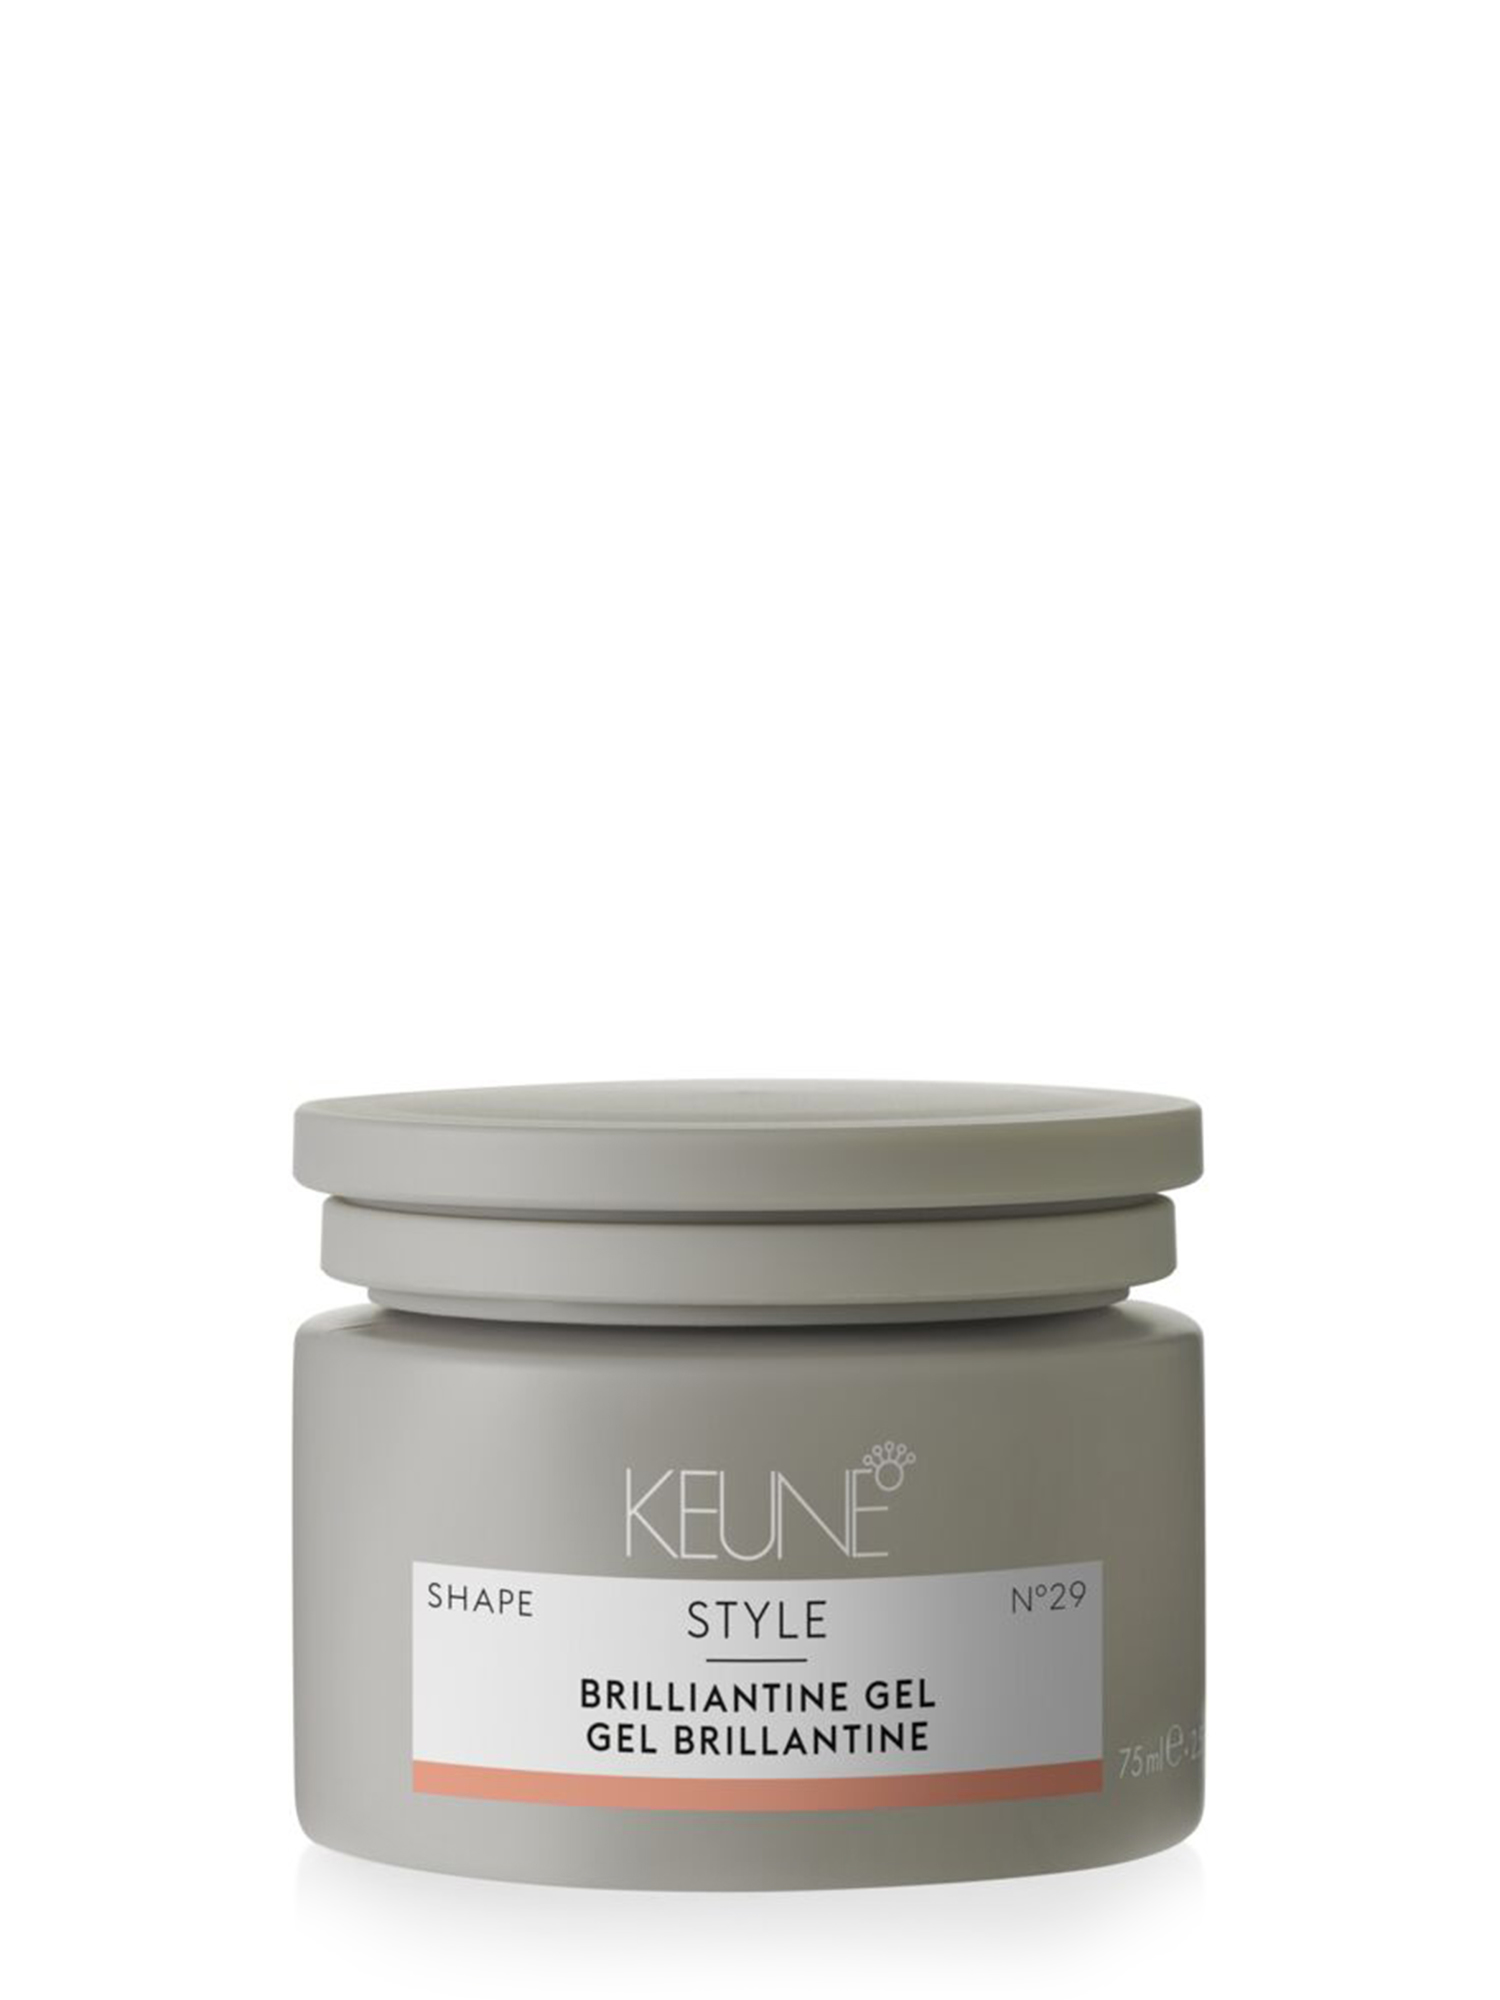 STYLE BRILLIANTINE GEL: Styling gel pomade for glossy hair and wet-look effects. An ideal hair product for braided hair. Discover it now on keune.ch!